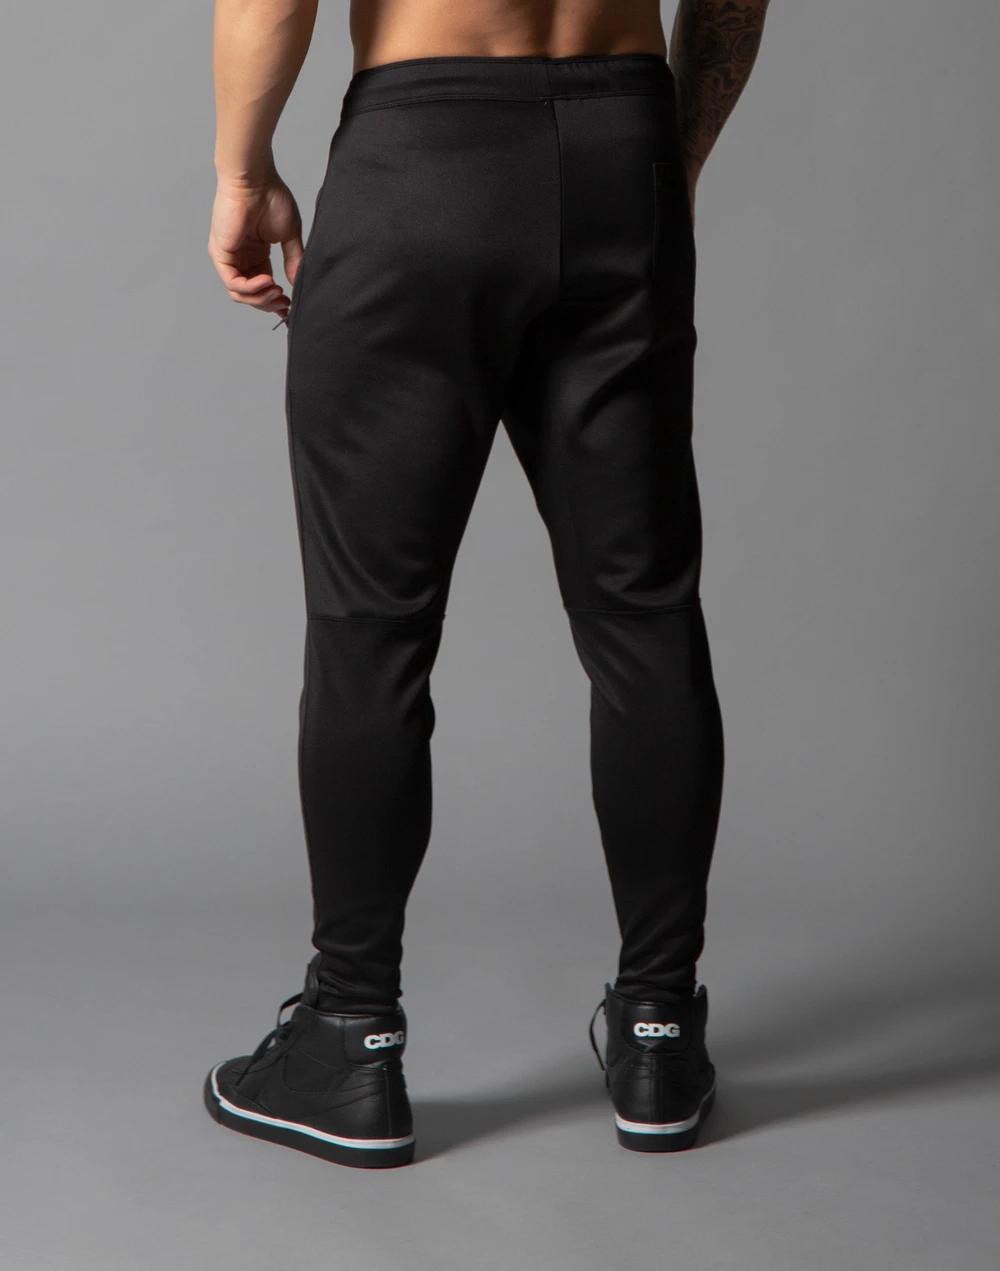 Sports pants Men's summer thin Running Pants With Zipper Pockets  quick-drying Joggers Loose Straight Cylinder Active Pants Gym - AliExpress